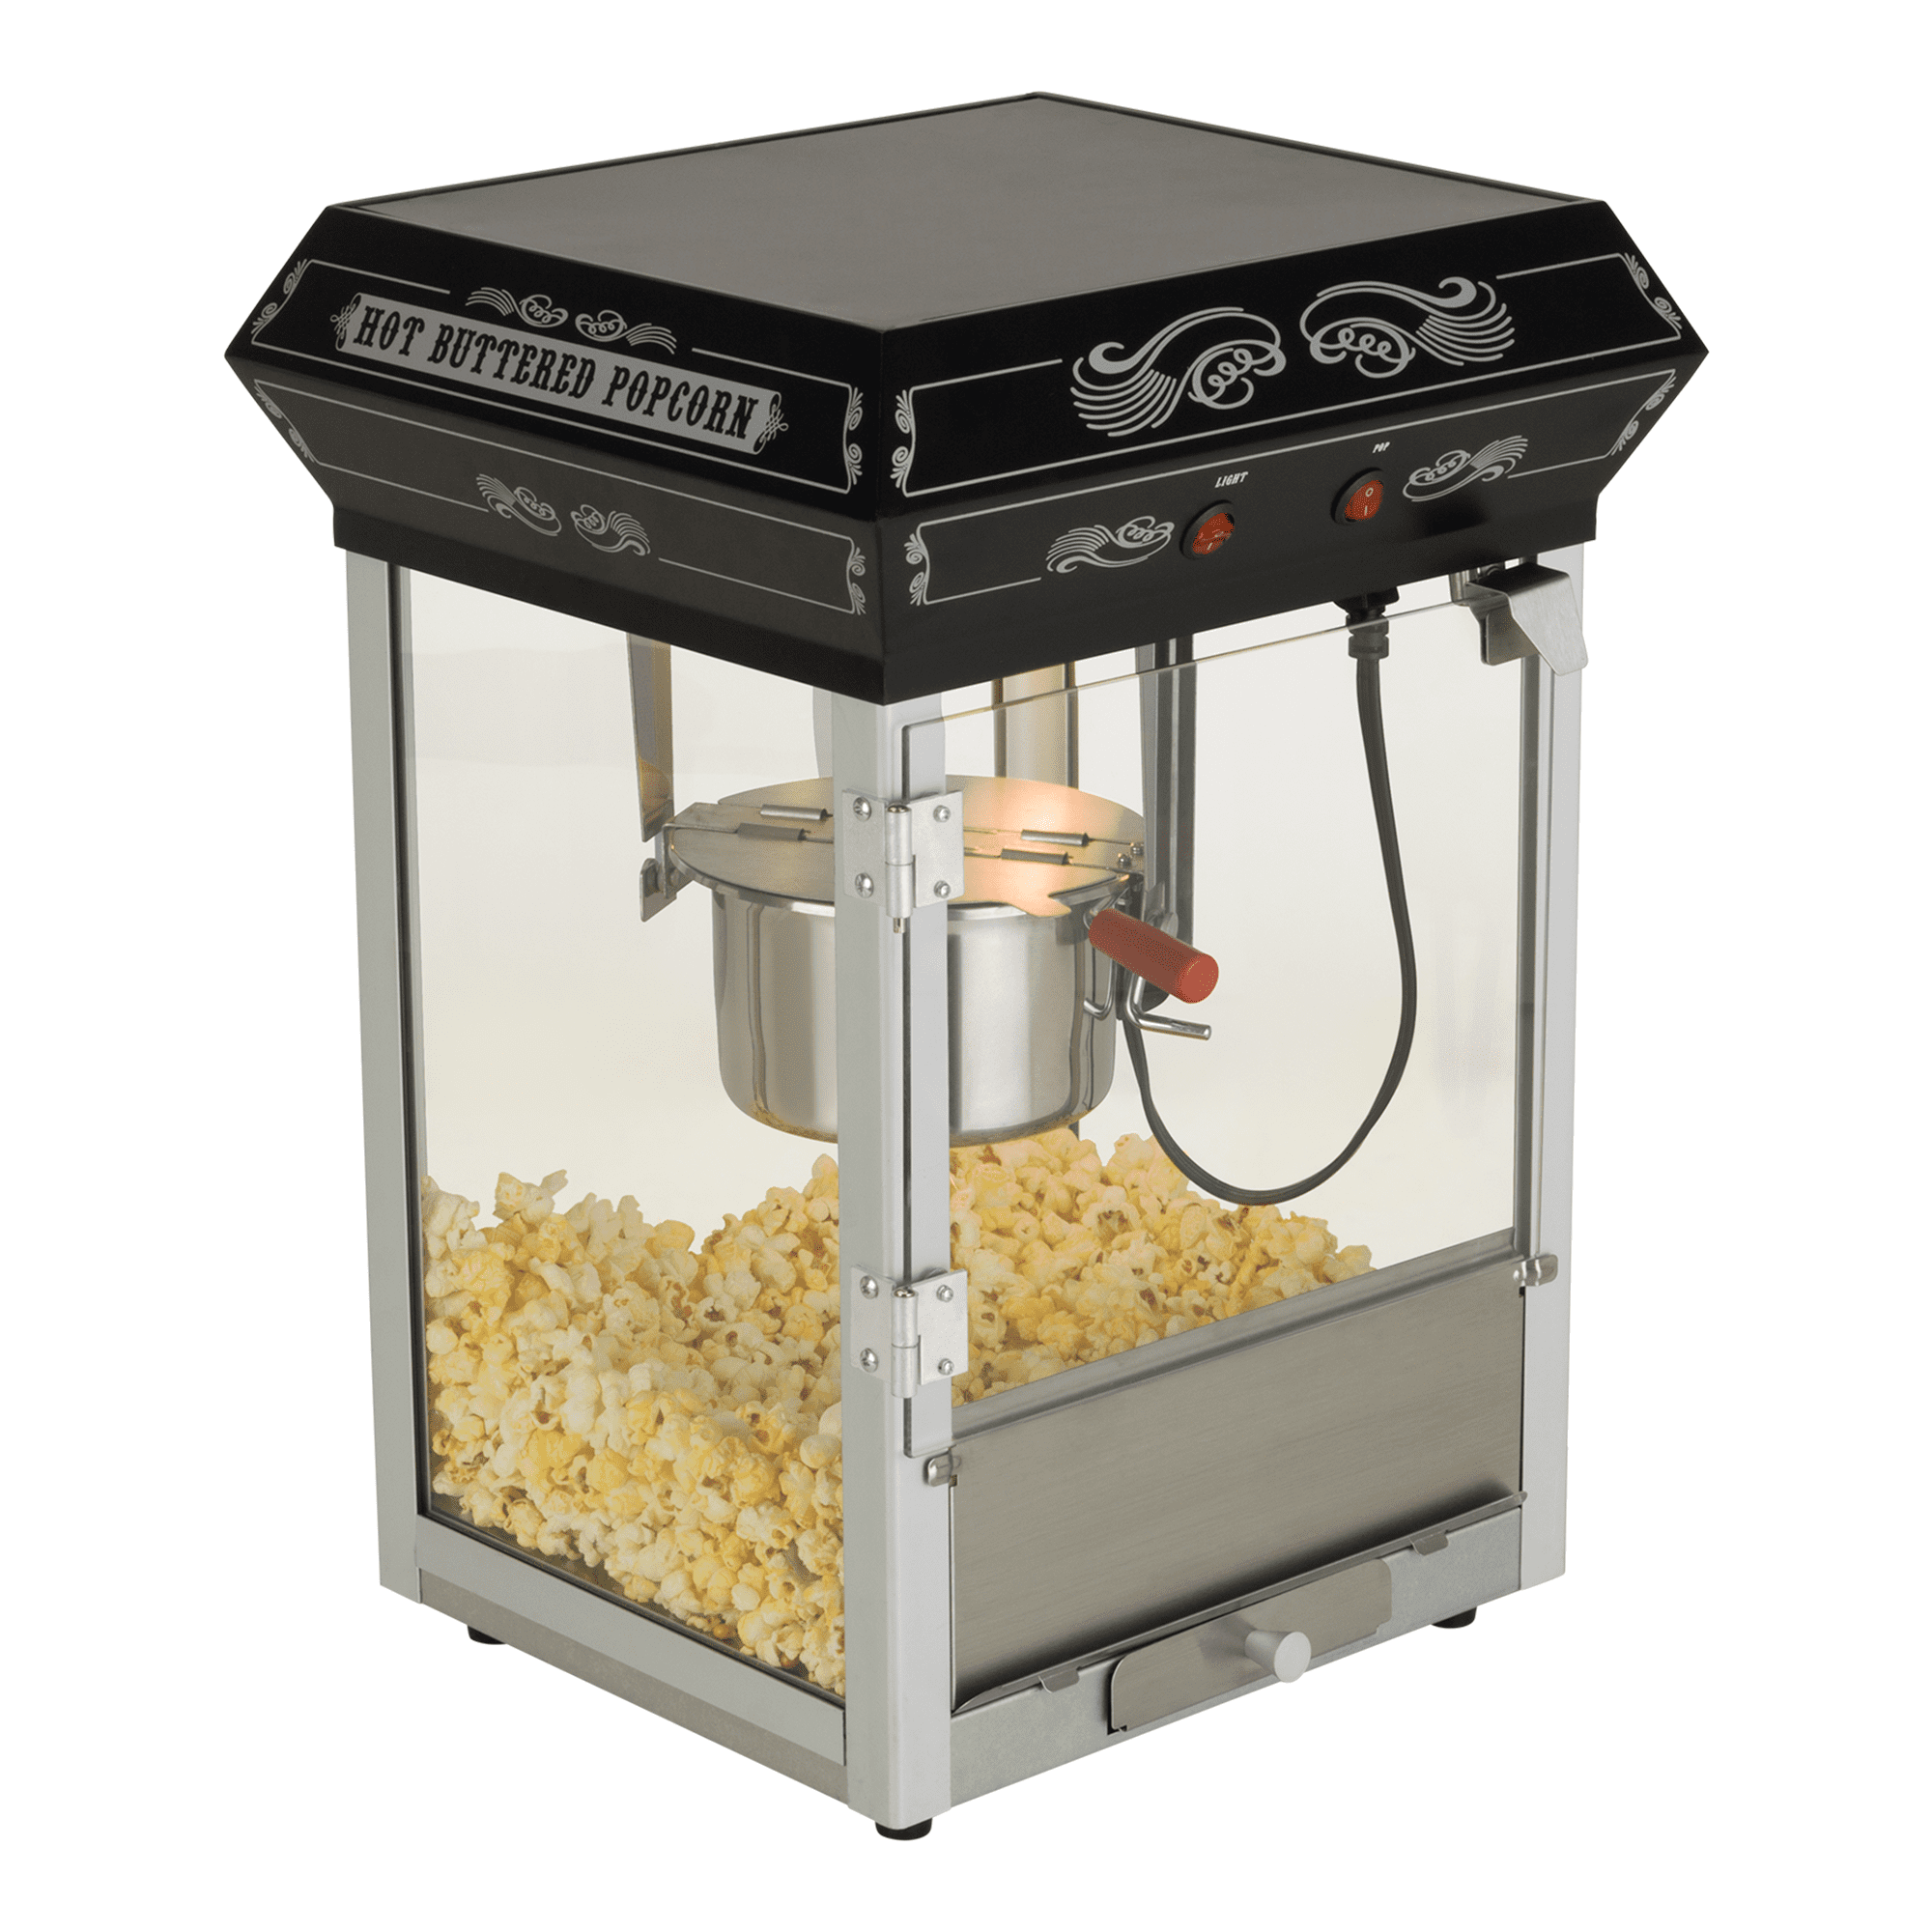 Funtime Sideshow Popper 4-Ounce Hot Oil Popcorn Machine with Cart Black/Silver 